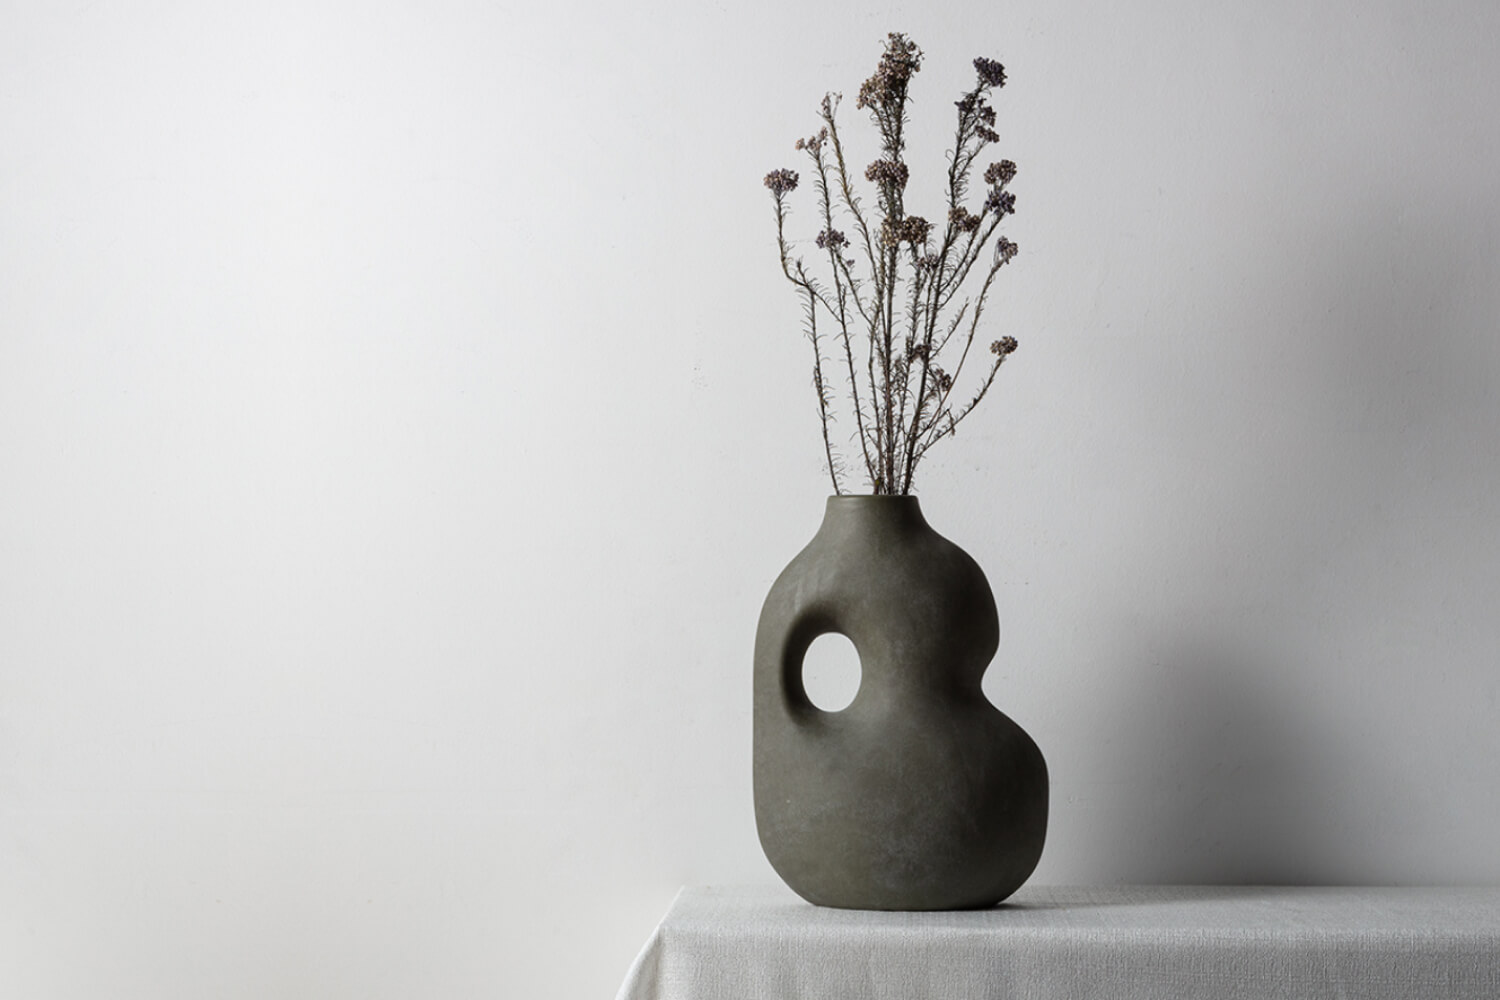 A Willow Decorative Sculptural Faded Earth Grey Rustic Wabi Sabi Ceramic Vase on a table, with slender dried flowers adding an elegant touch to its unique design.